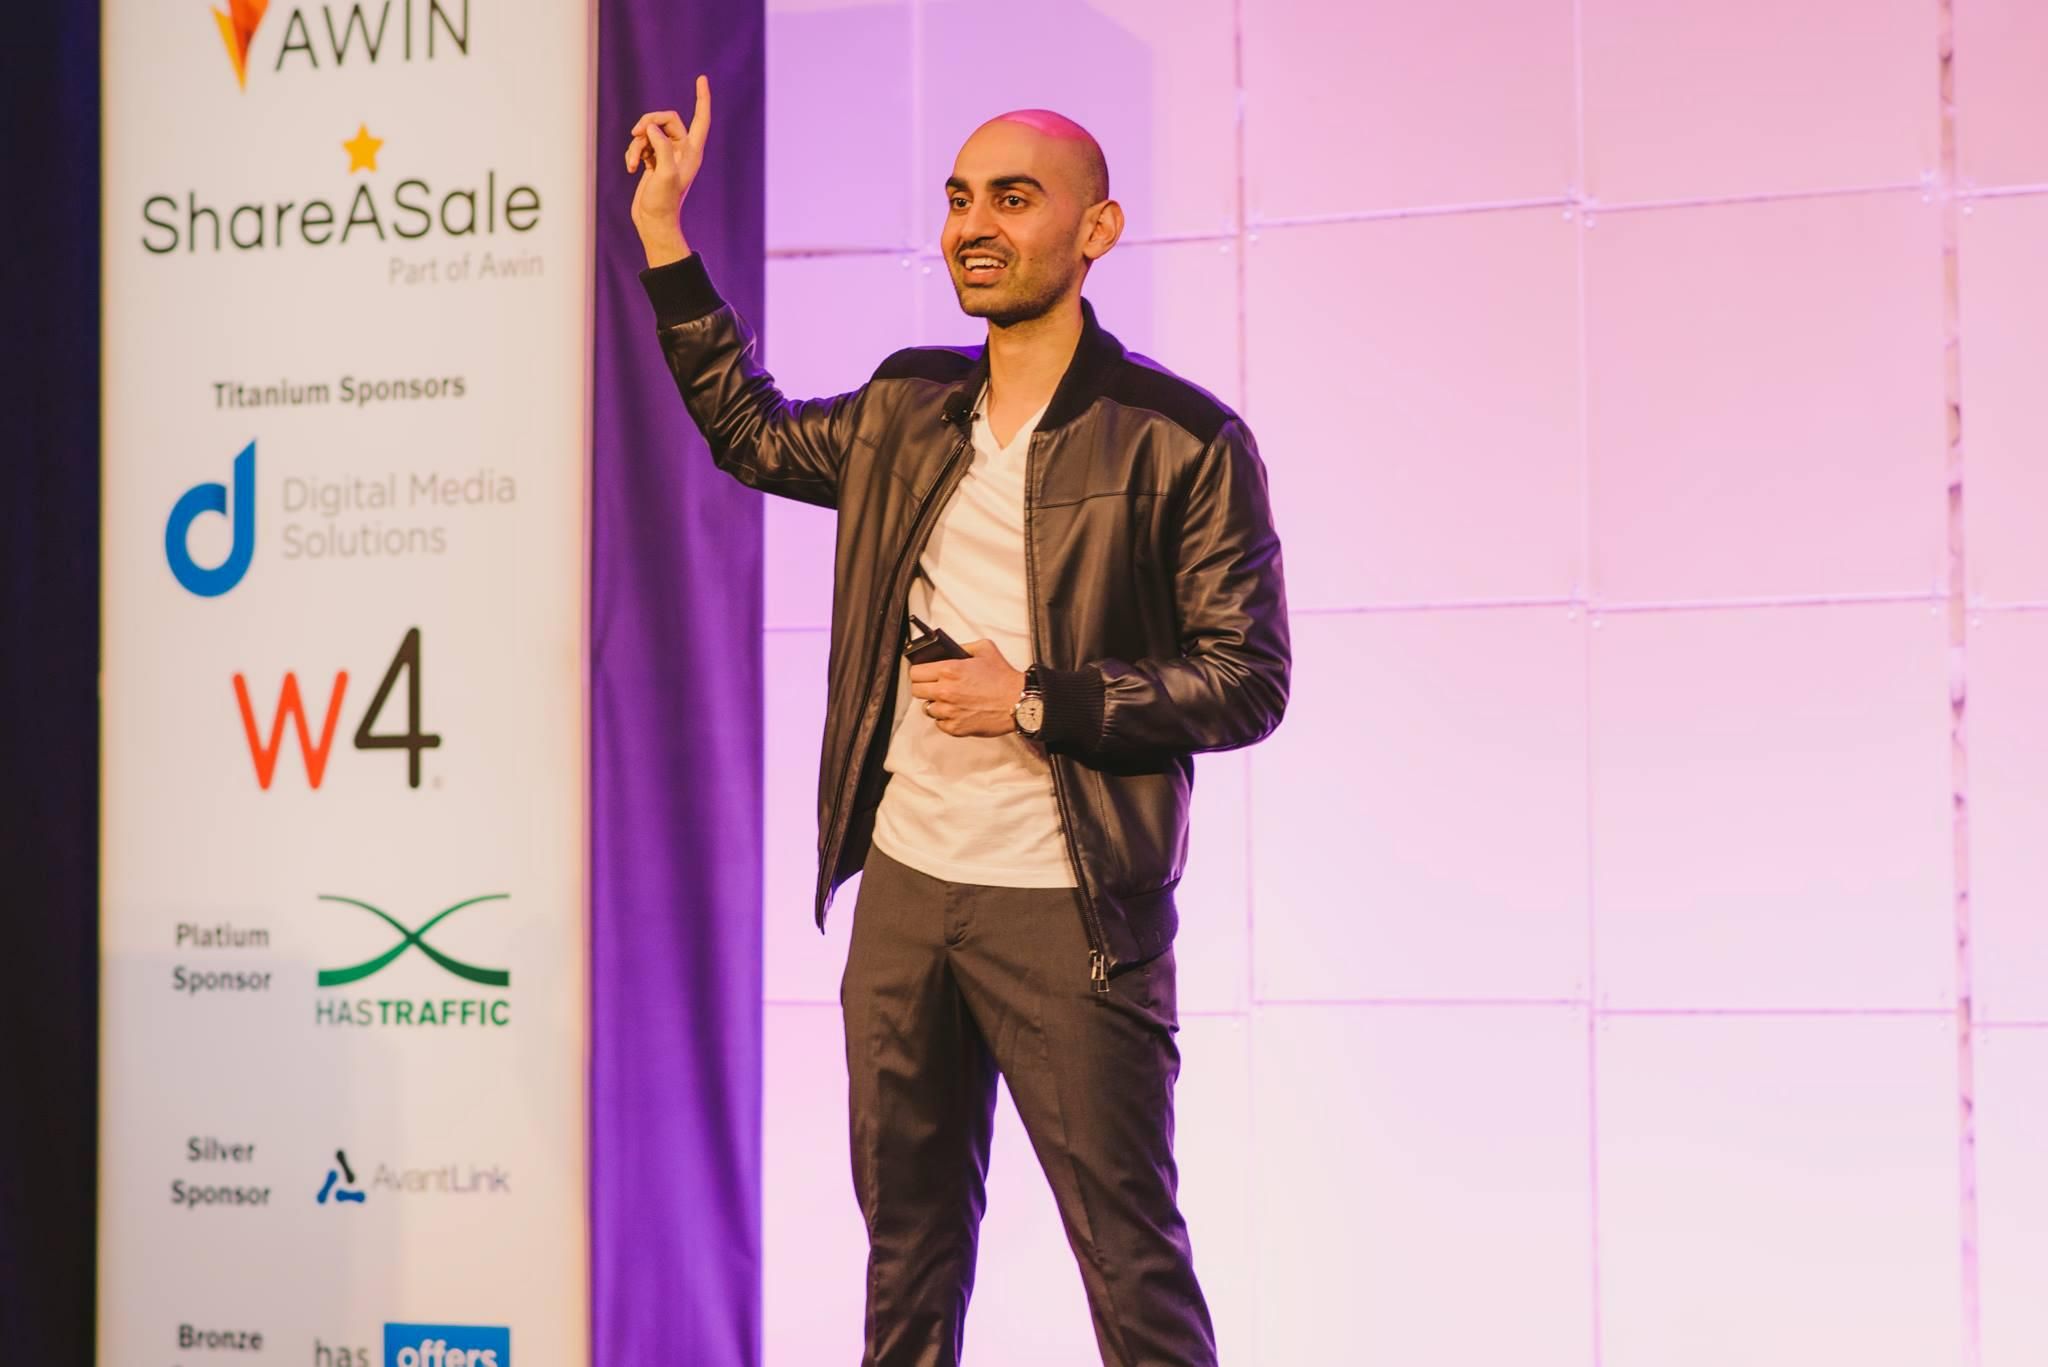 Watch the Neil Patel keynote video from #ASW19